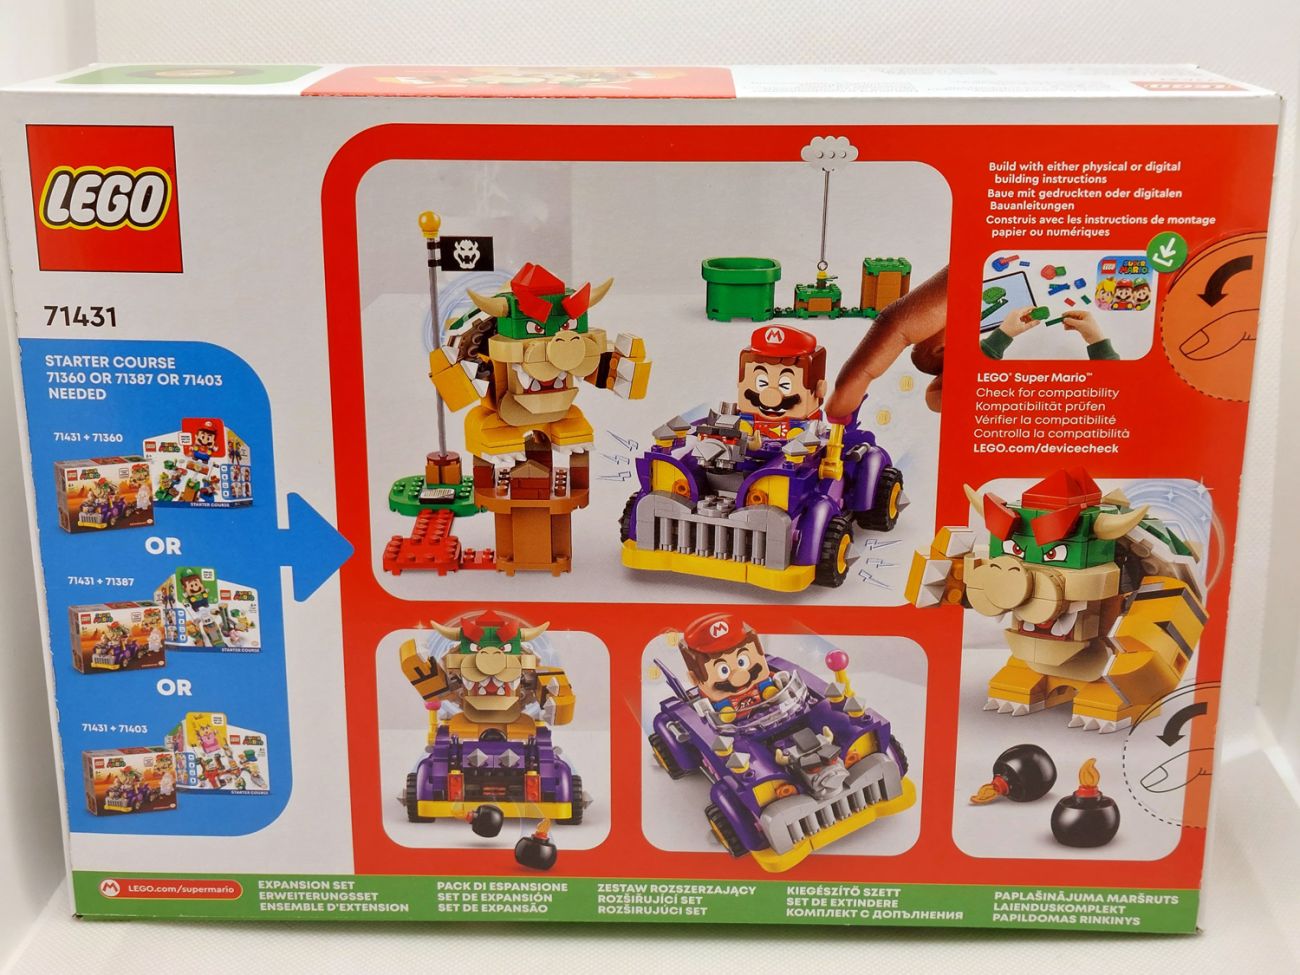 LEGO Super Mario 71431 Bowsers Monsterkarre im Review